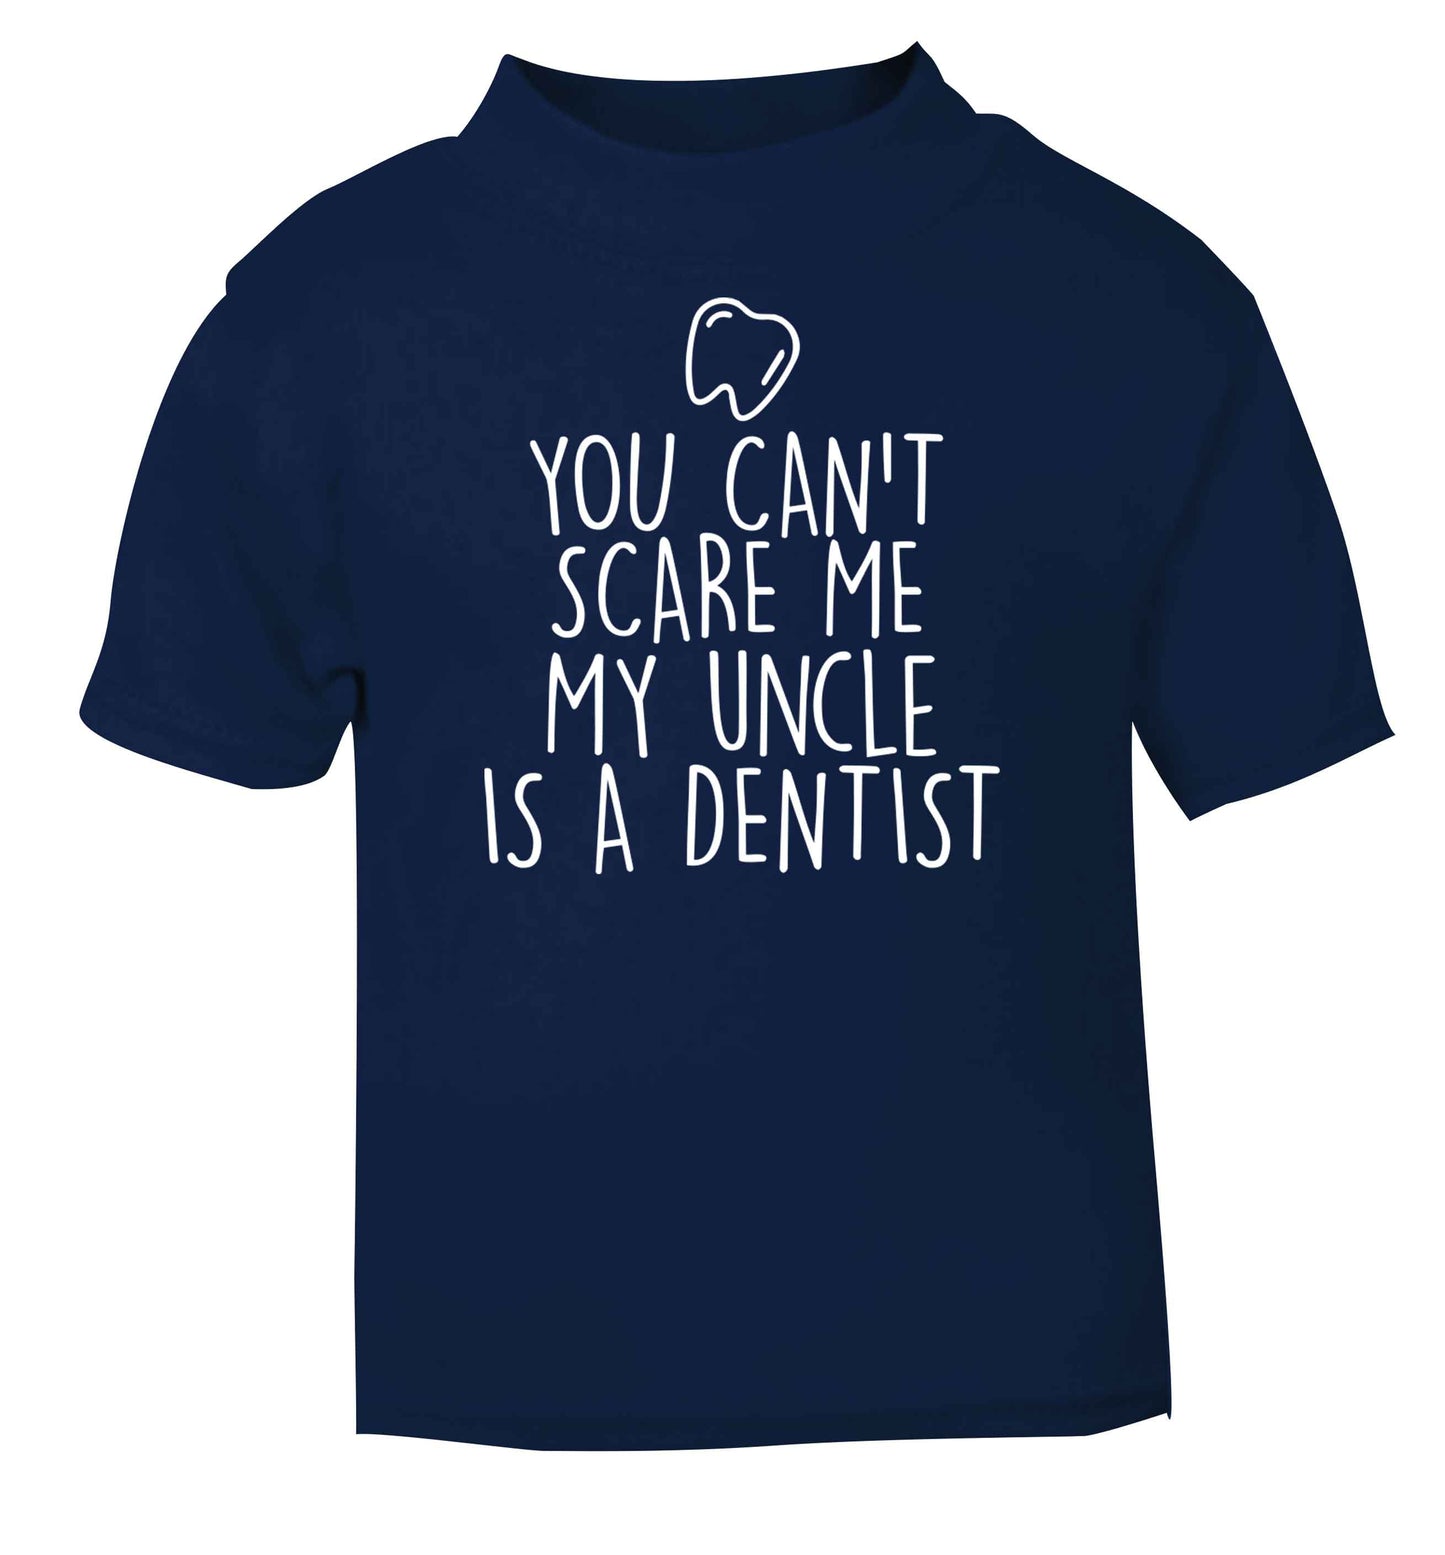 You can't scare me my uncle is a dentist navy baby toddler Tshirt 2 Years